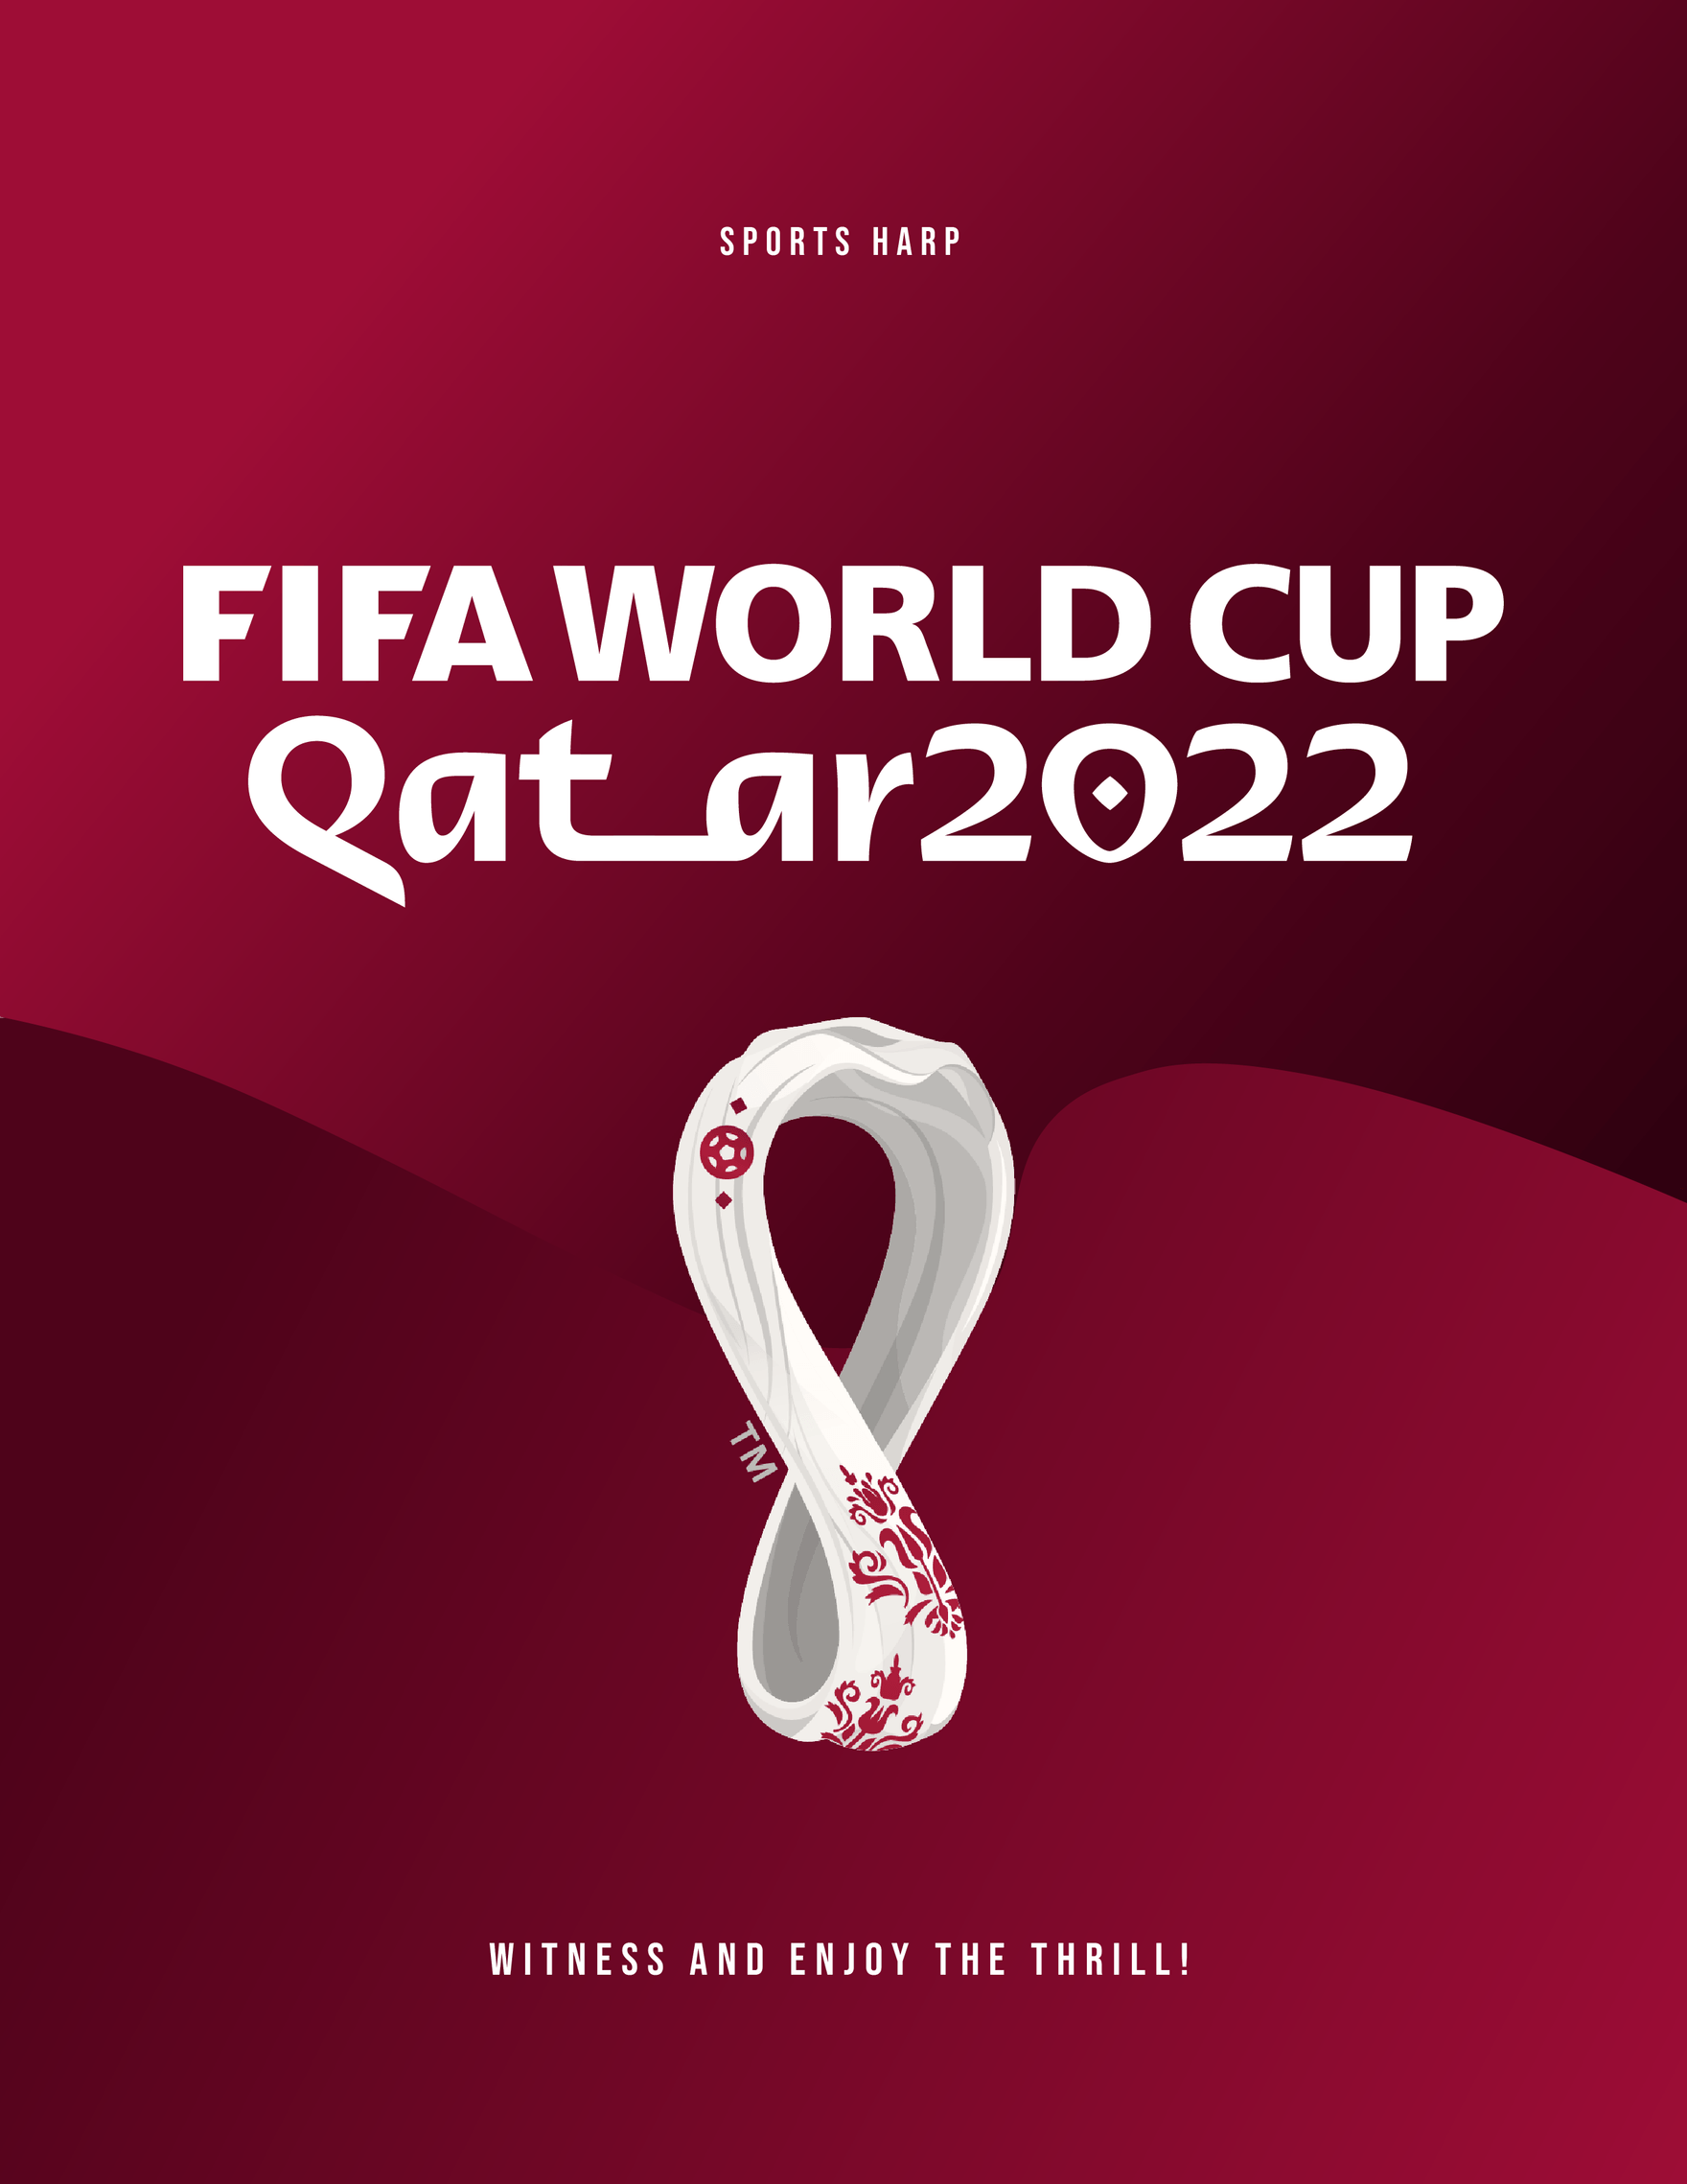 World Cup 2022 Poster